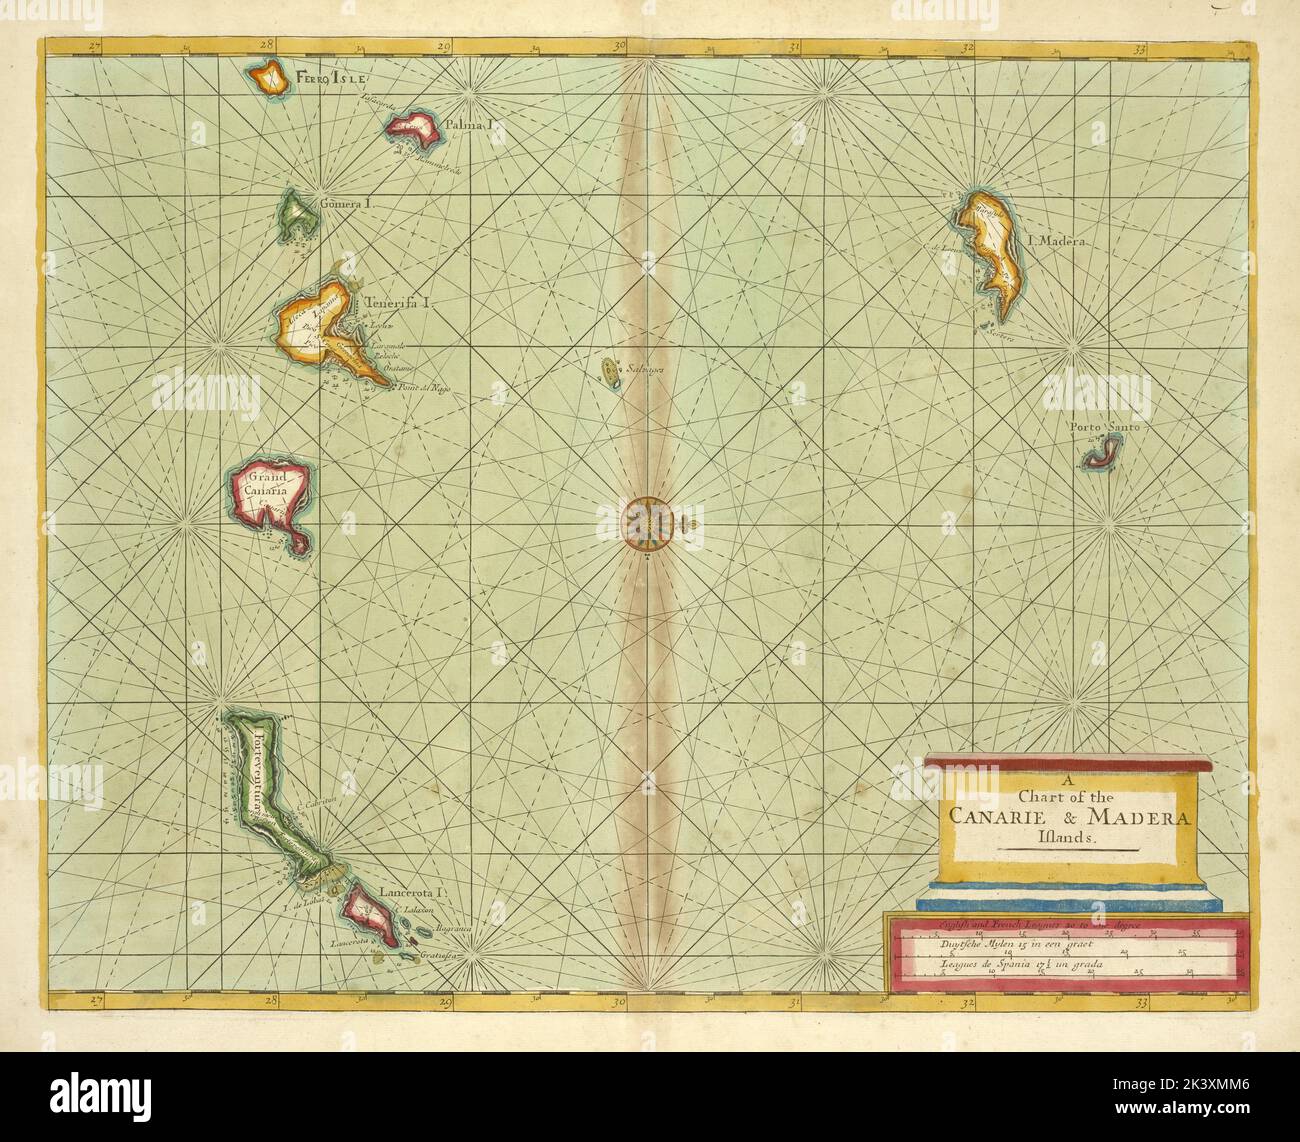 A chart of the CANARIE and MADERA Islands 1702 - 1707. Cartographic. Maps, Nautical charts. Lionel Pincus and Princess Firyal Map Division. Madeira Islands, Canary Islands Stock Photo